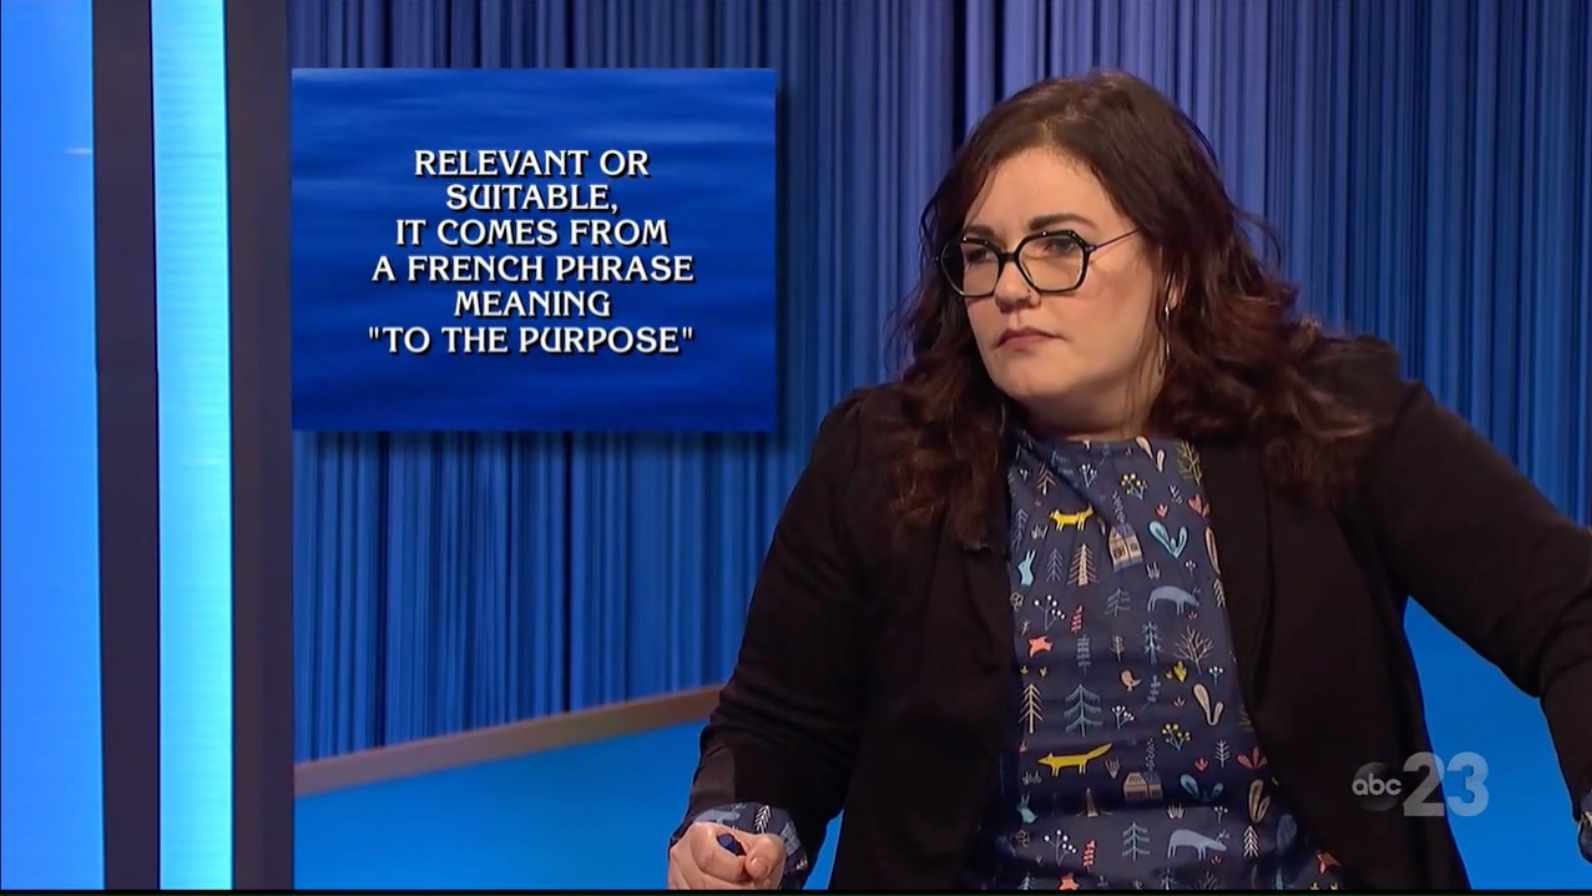 Tamara missed a clue from the Jeopardy! category Silent Consonant Words